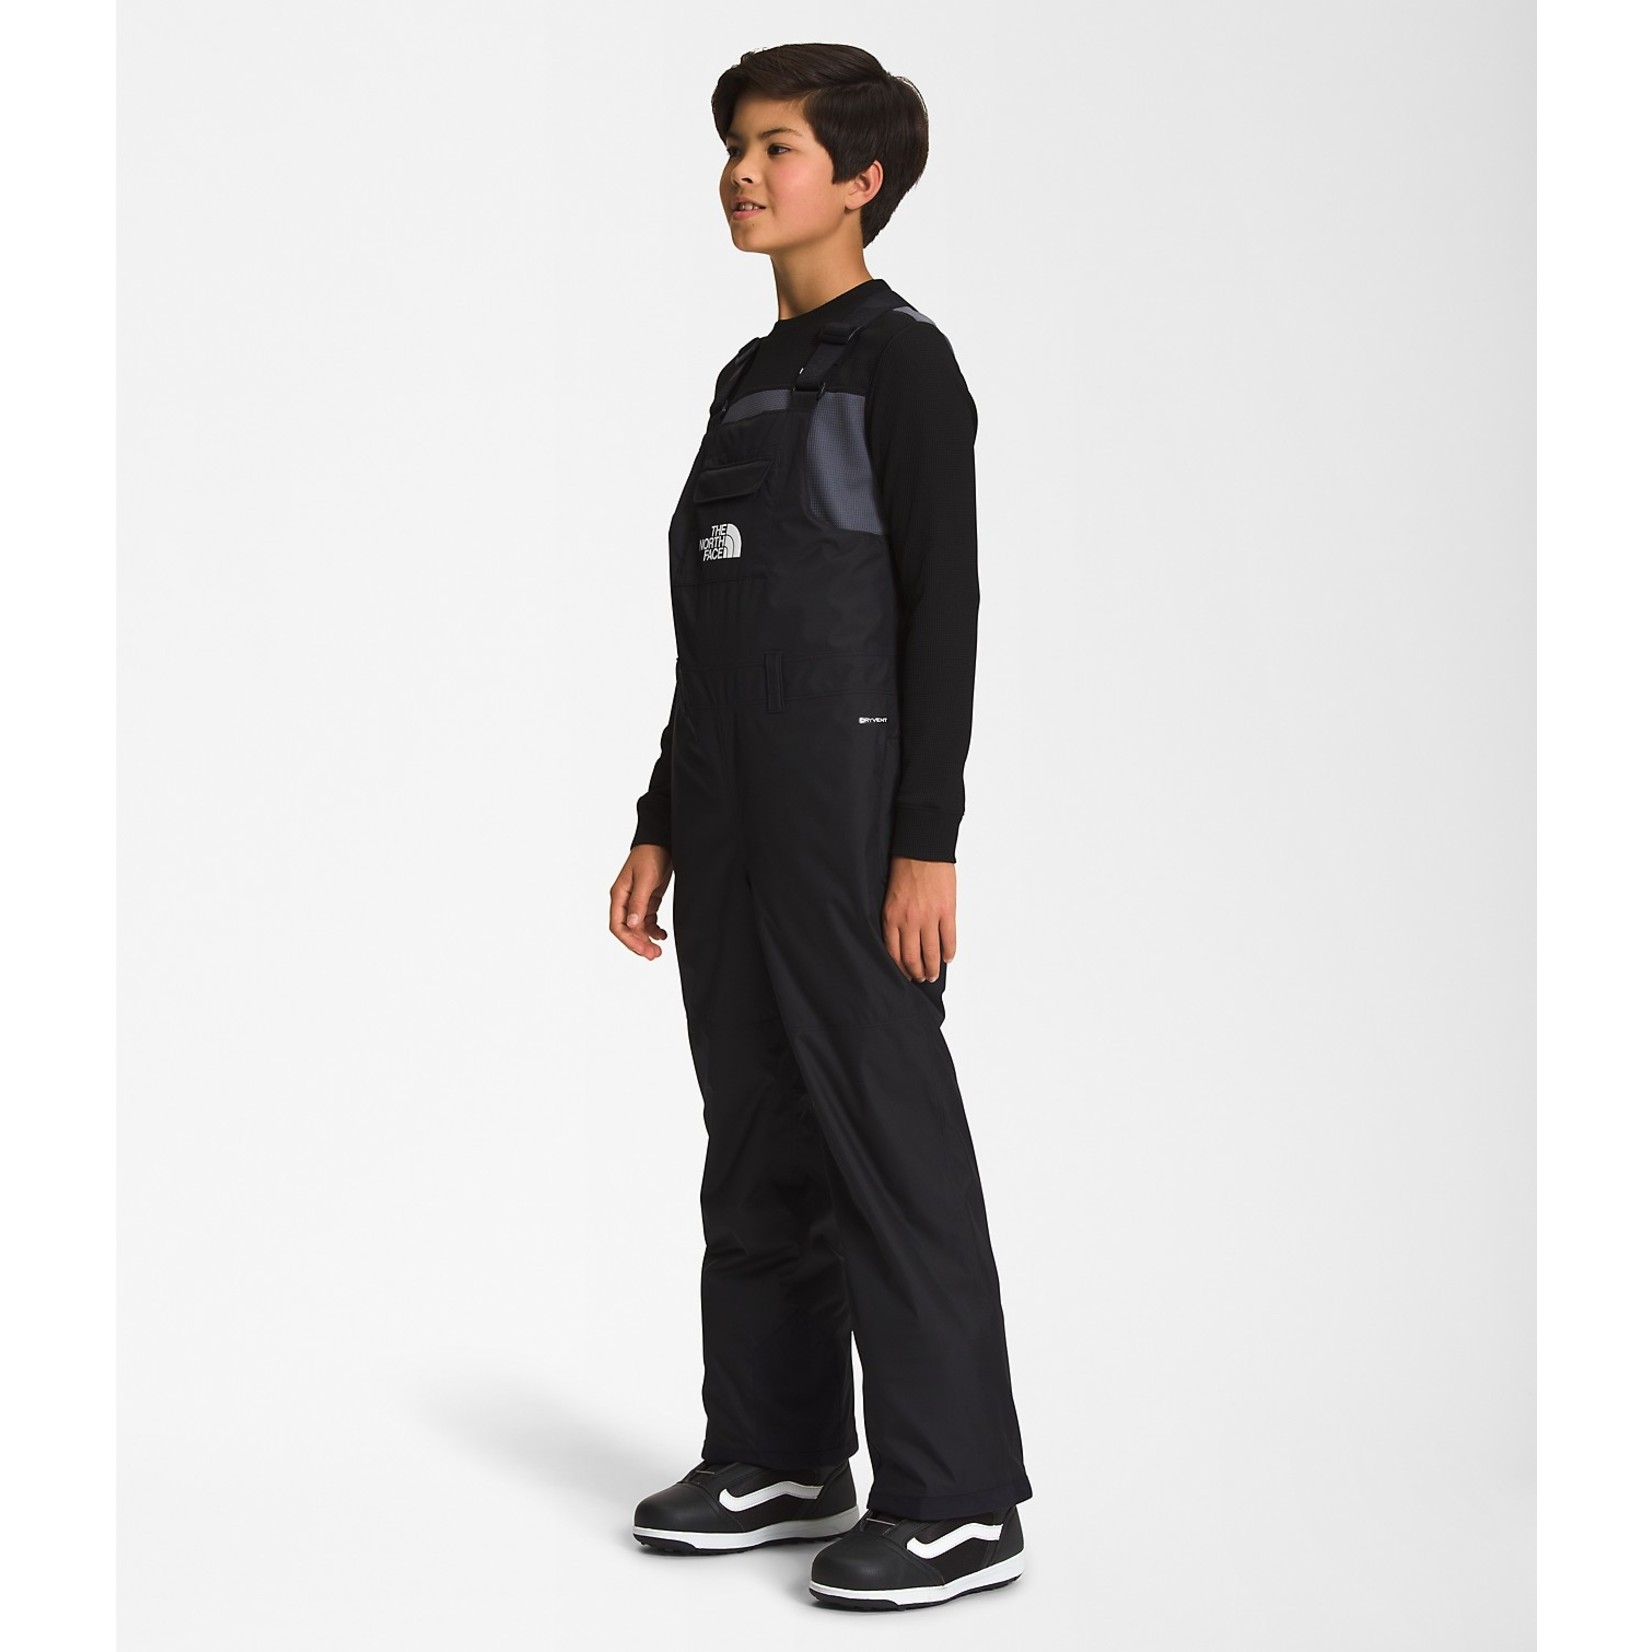 THE NORTH FACE TEEN FREEDOM INSULATED BIB